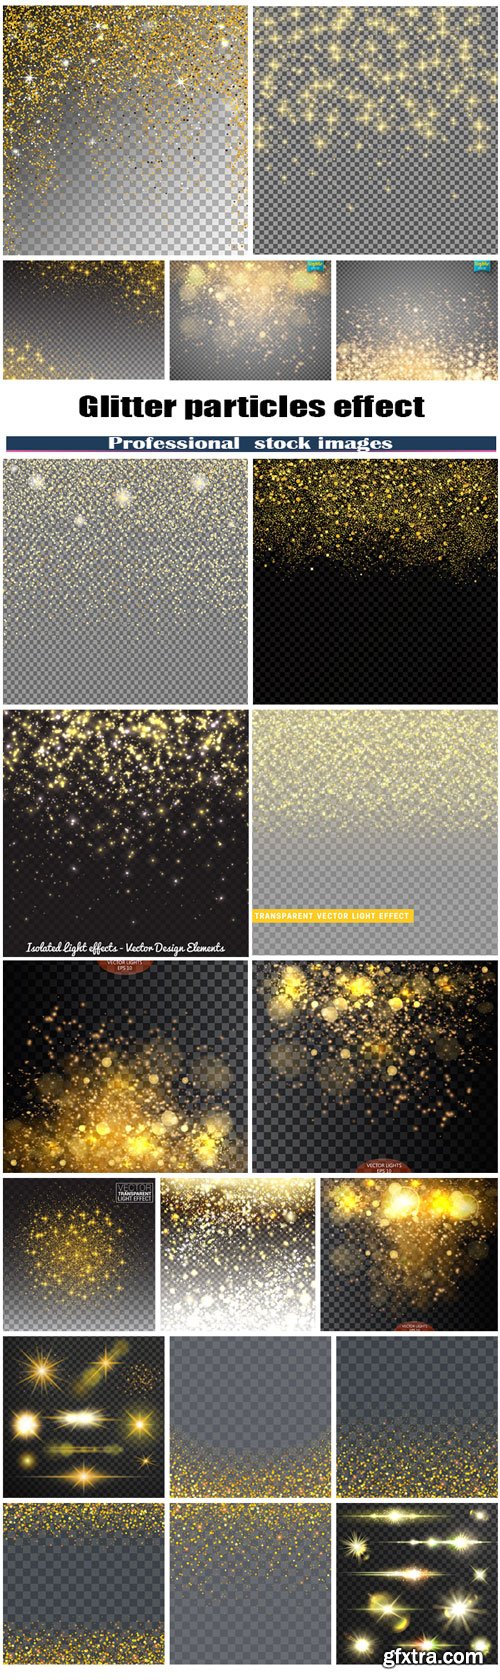 Glitter particles effect